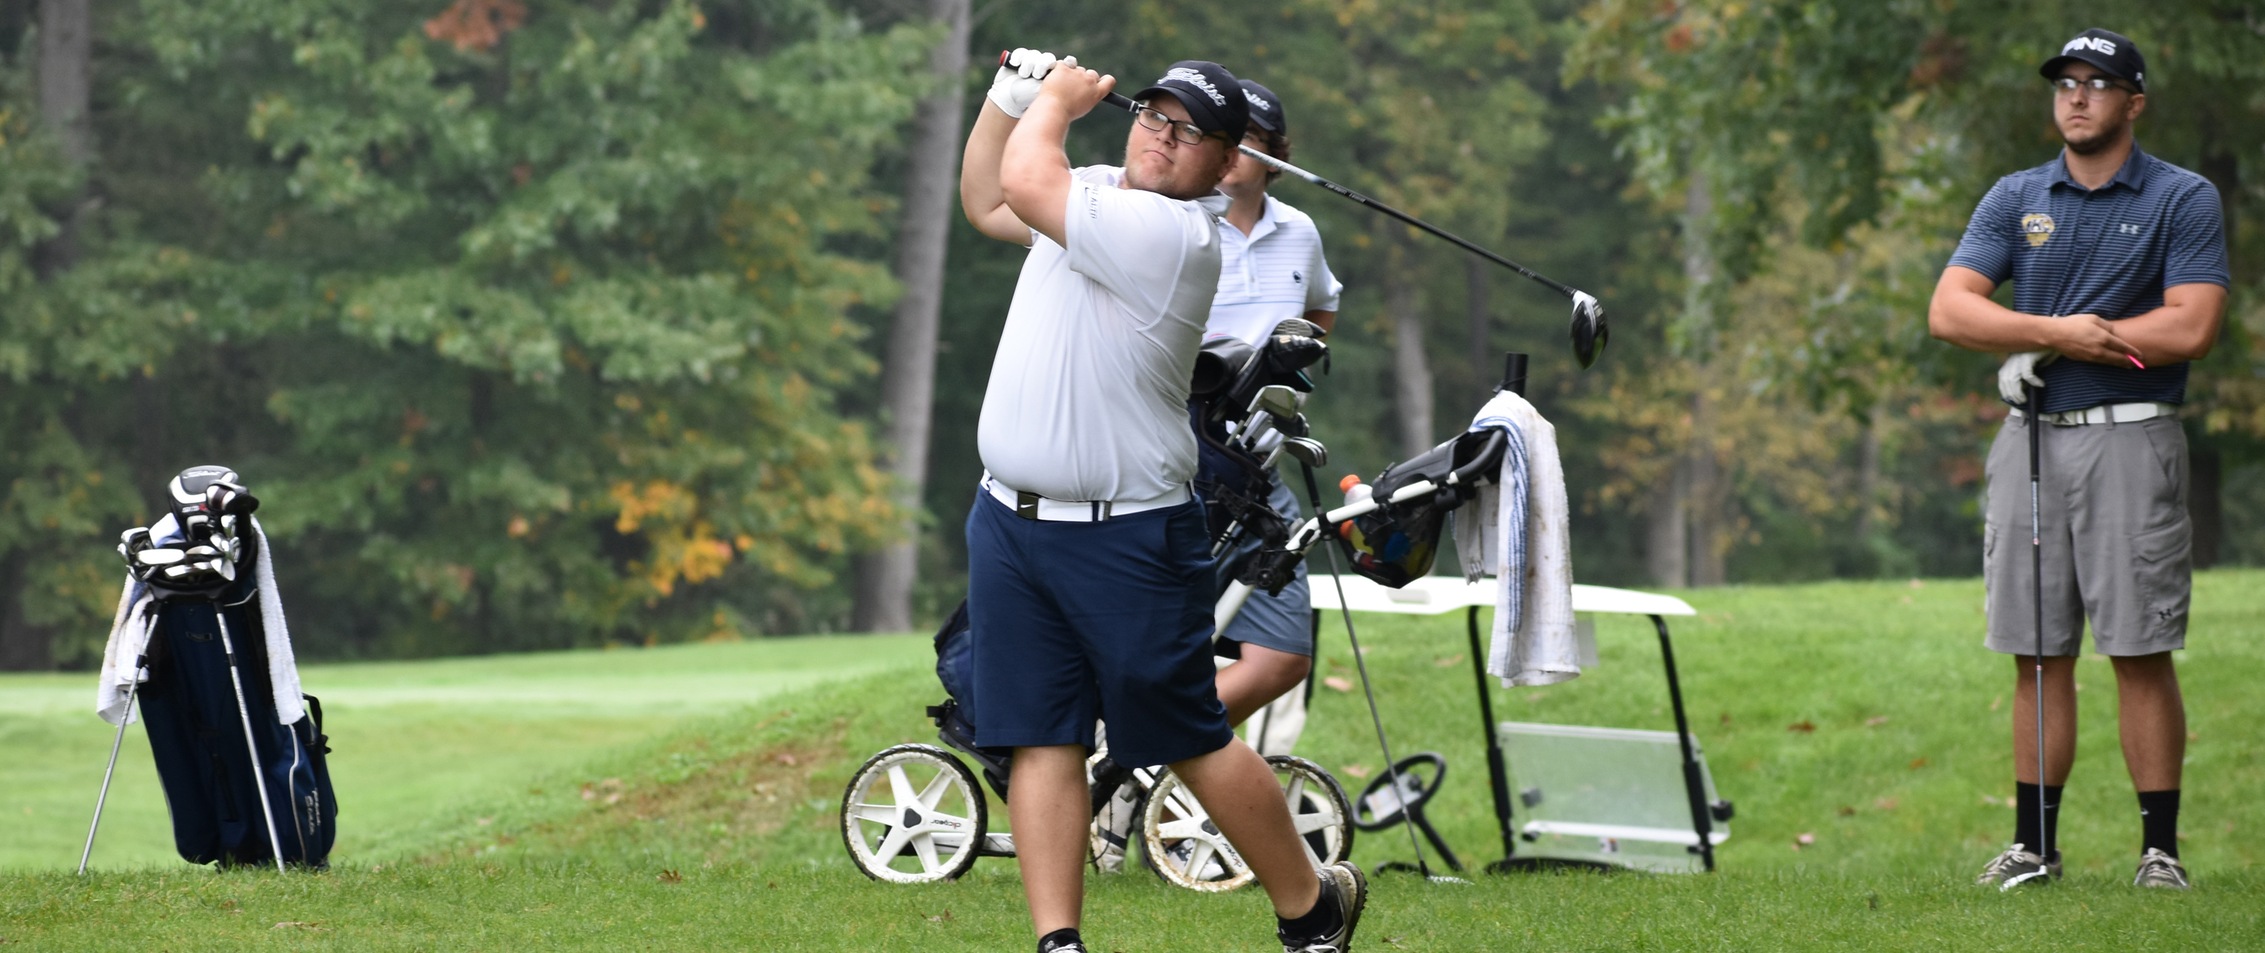 Penn State Mont Alto's Austin Green won medalist honors at the 2018 PSUAC Golf Championships.